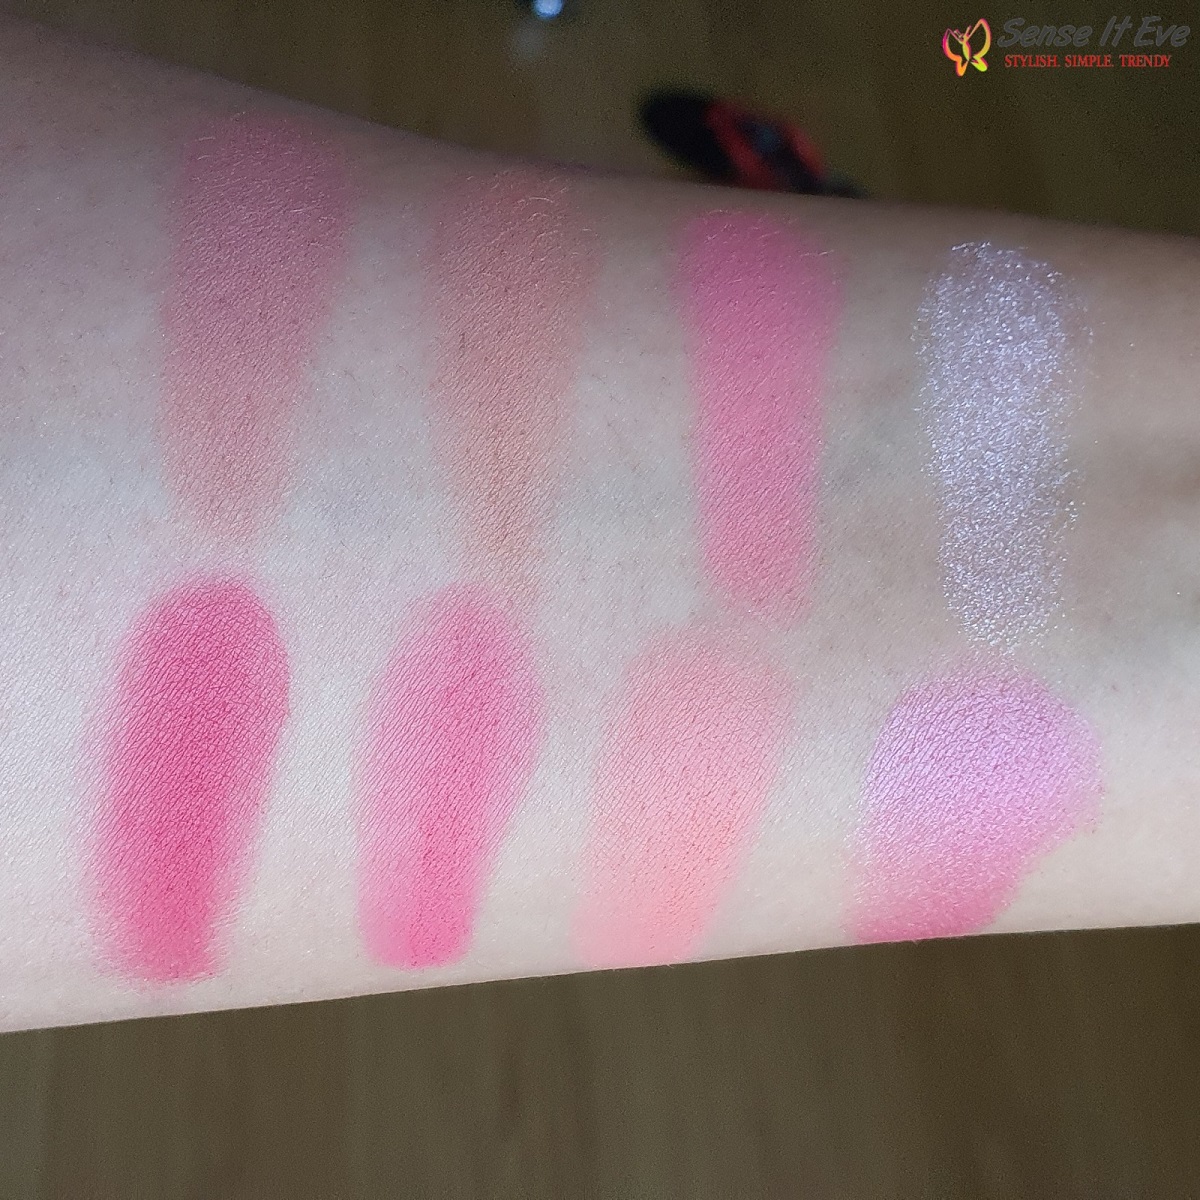 Makeup Revolution London Ultra Professional Blush Palette Sugar and Spice Swatches Sense It Eve Revolution Ultra Blush Palette Sugar and Spice : Review & Swatches